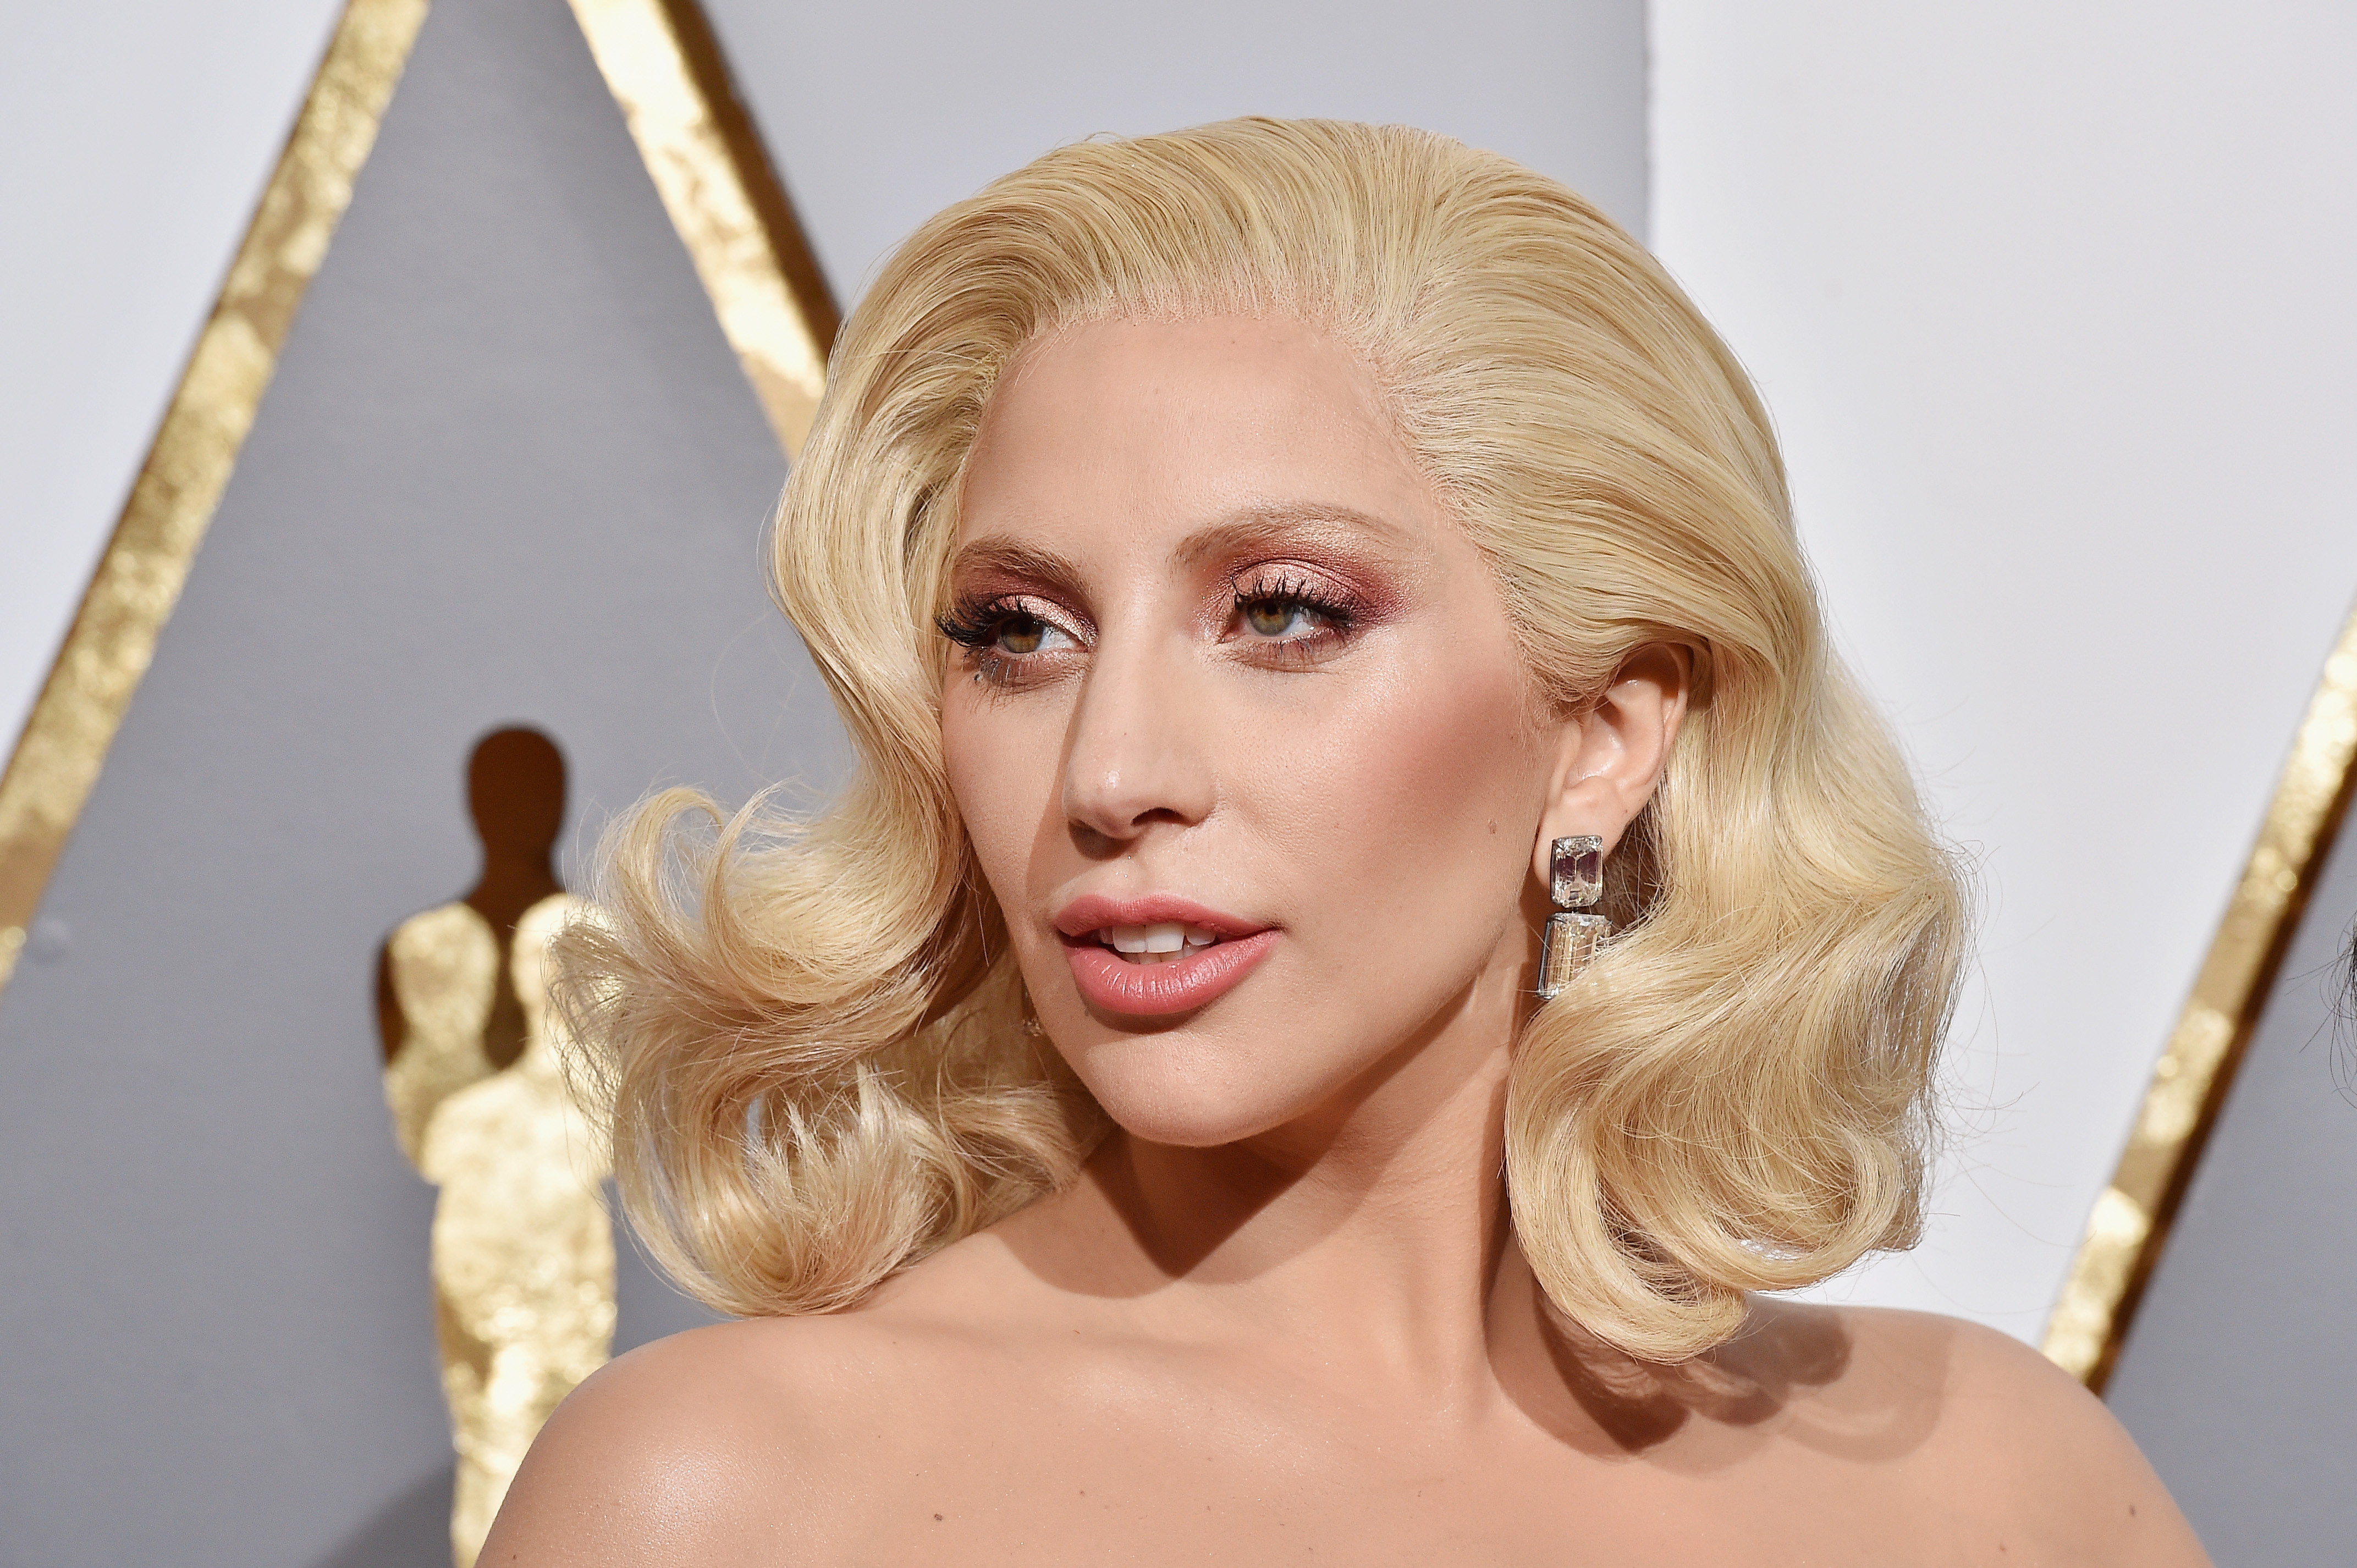 HOLLYWOOD, CA - FEBRUARY 28:  Actress Lady Gaga attends the 88th Annual Academy Awards at Hollywood & Highland Center on February 28, 2016 in Hollywood, California.  (Photo by Kevork Djansezian/Getty Images)